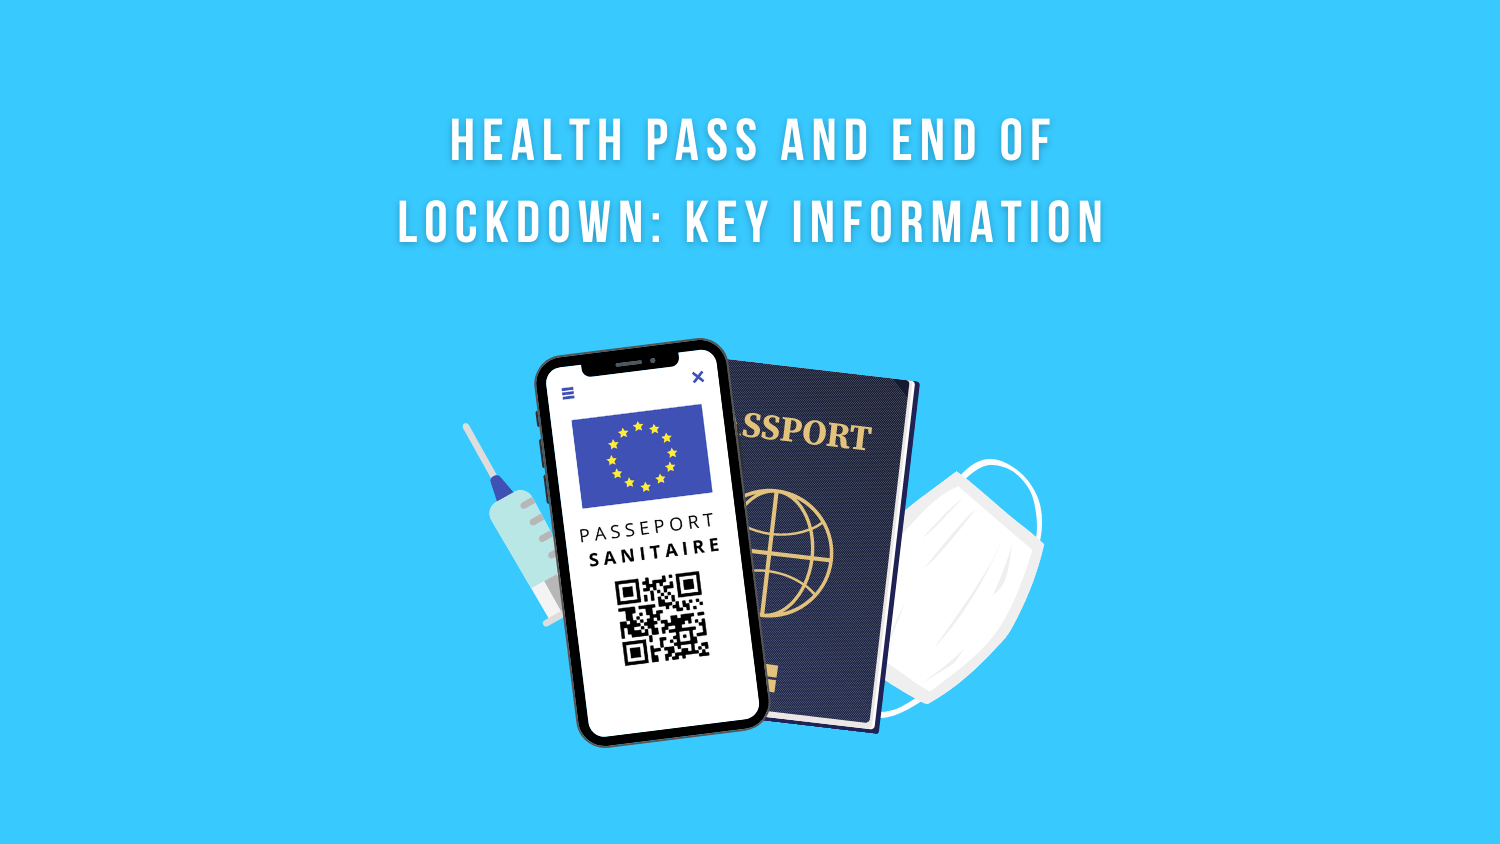 Health pass end of lockdown travel information